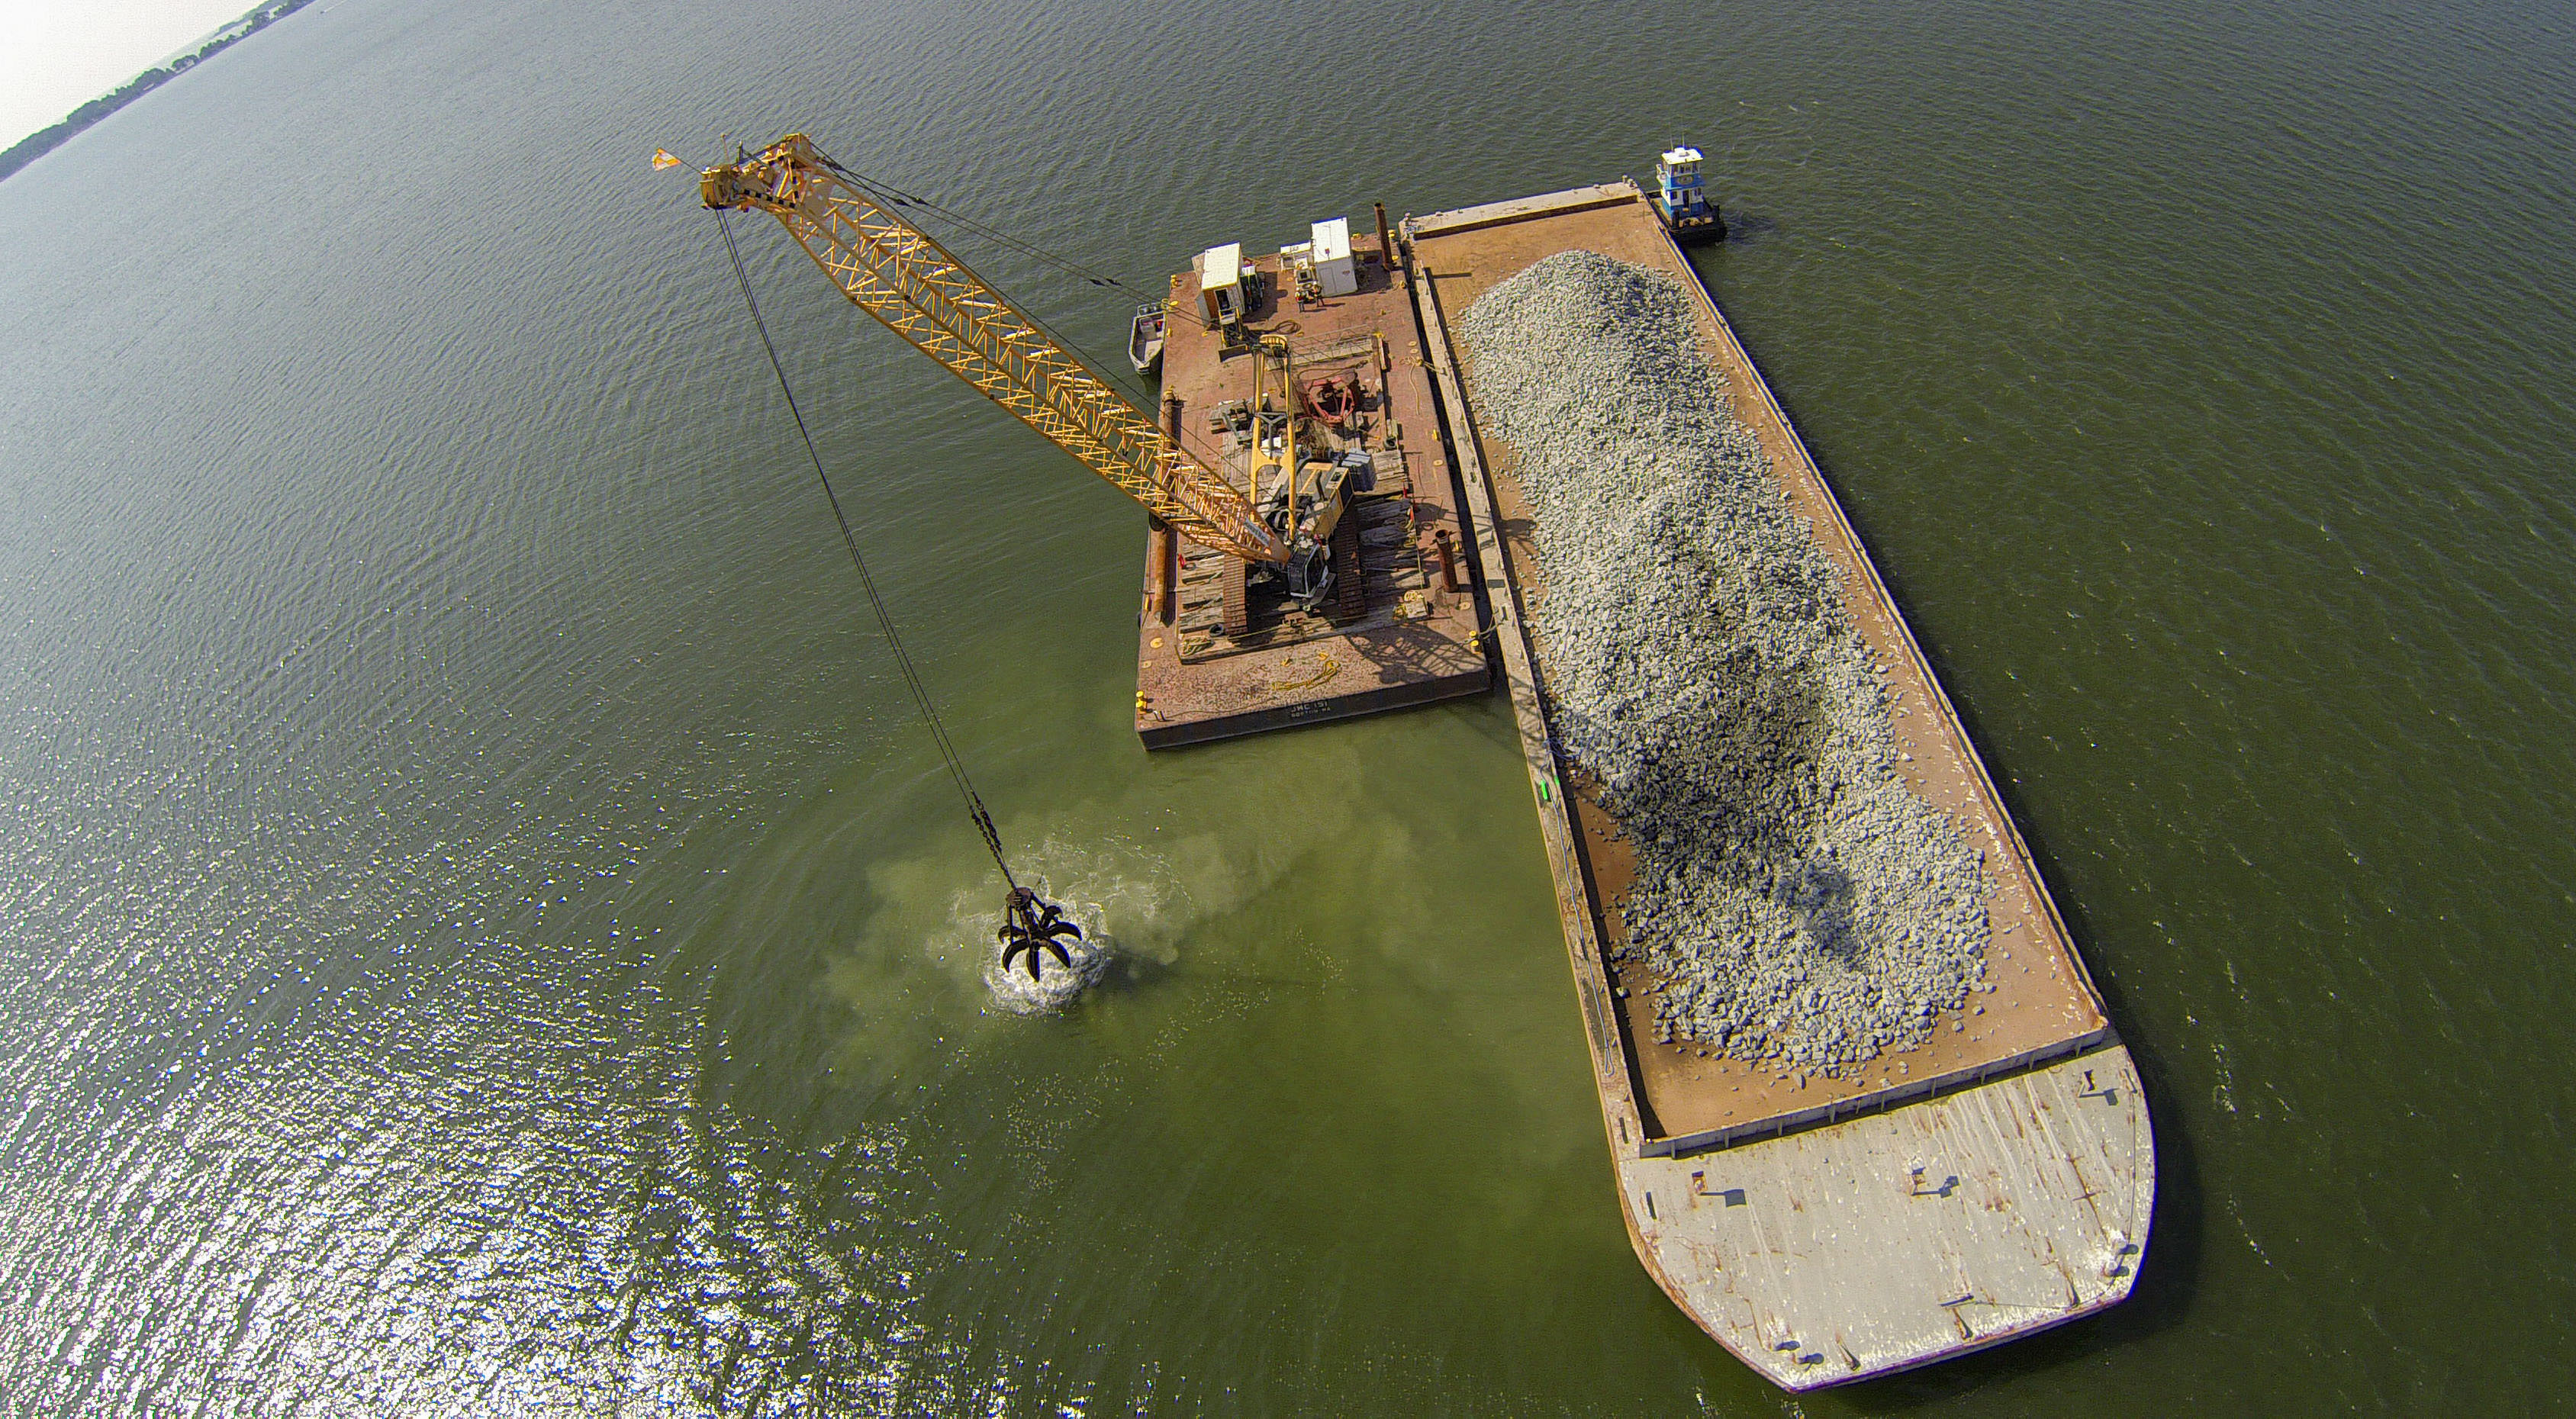 Aerial view looking down on a floating barge in the Piankatank River. A large crane is being used to scoop up chunks of granite rock from a pile on the barge and place them on a new oyster reef.